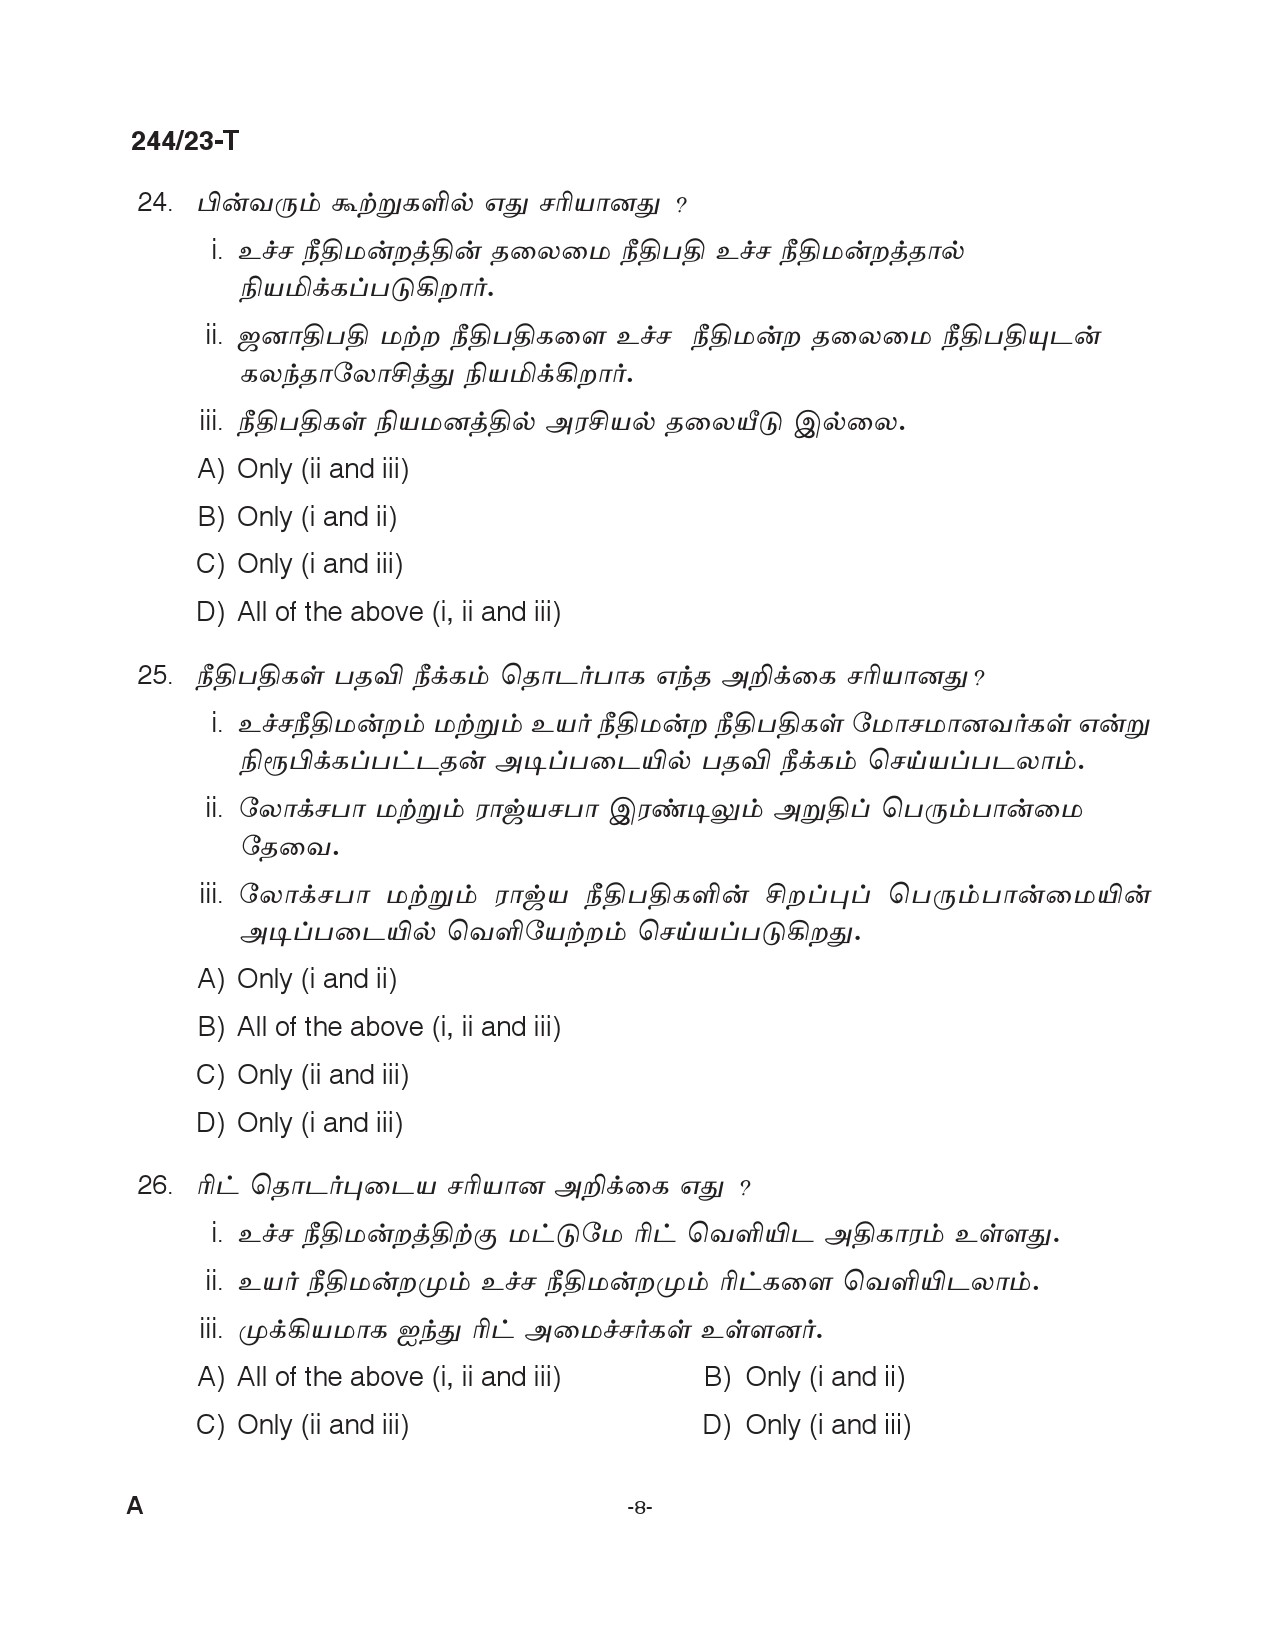 KPSC Fire and Rescue Officer Trainee Tamil Exam 2023 Code 2442023 T 7